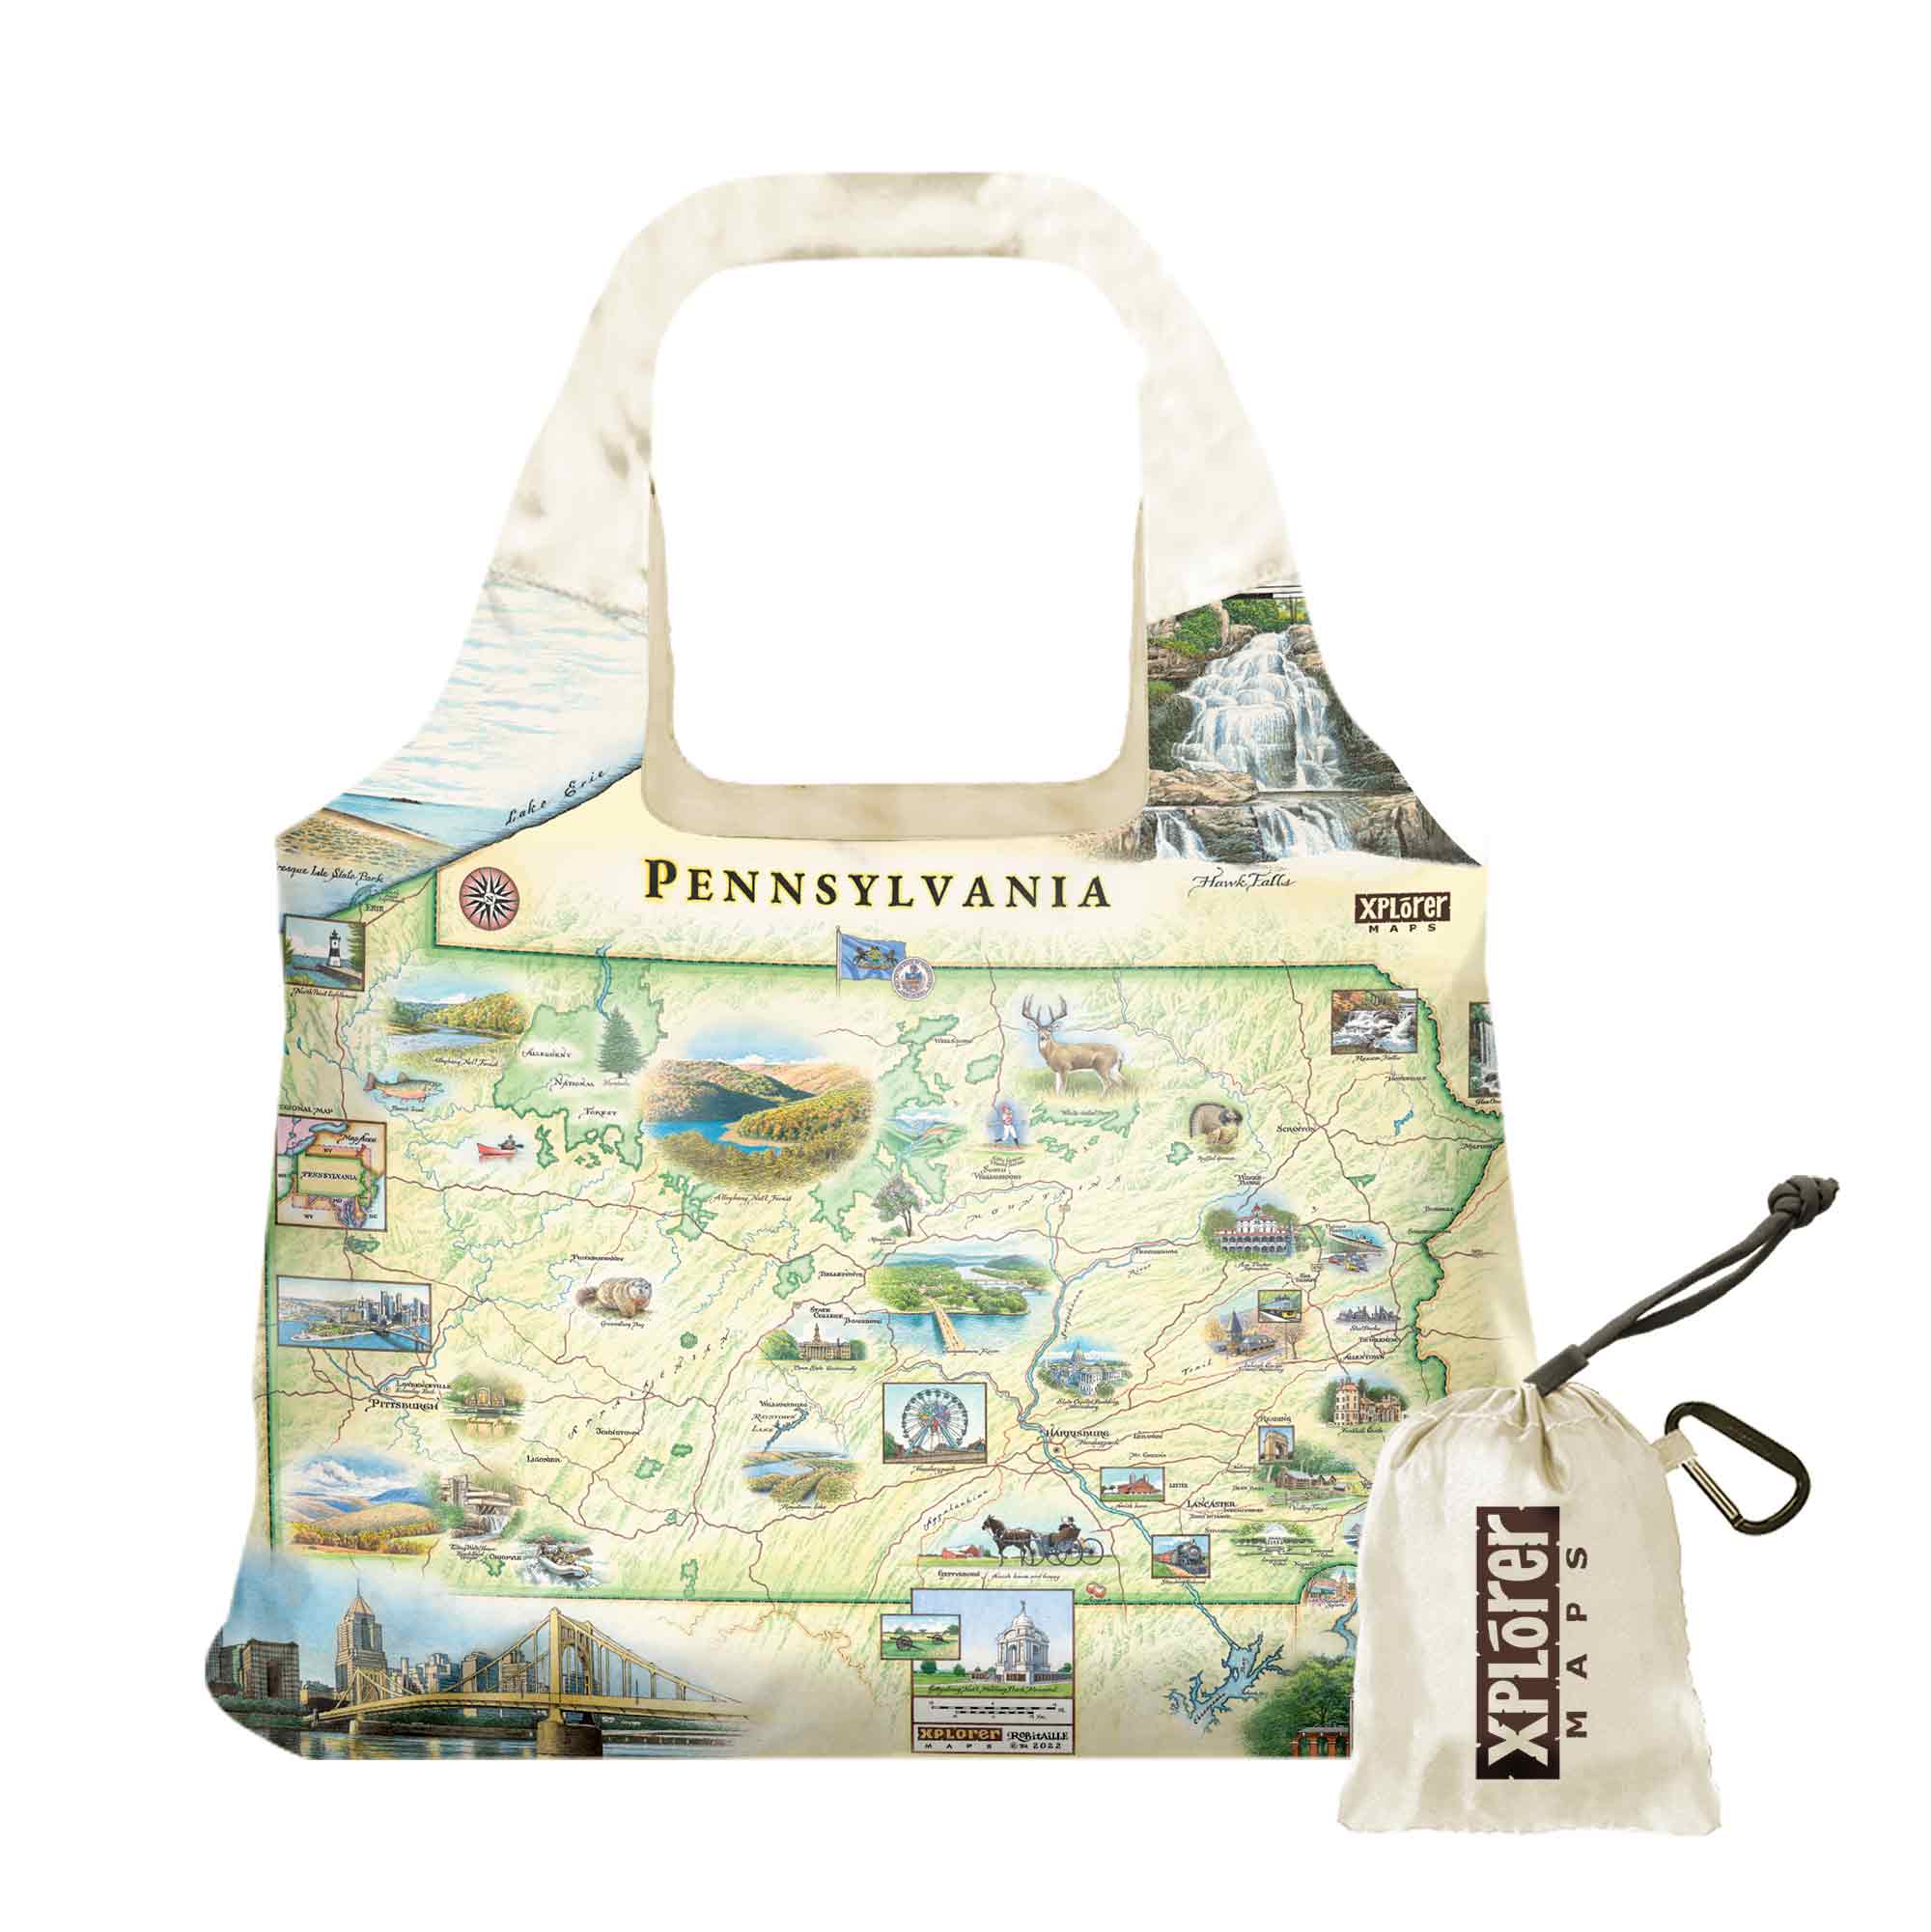 Pennsylvania State Pouch Tote Bag featuring Pittsburg, Philadelphia, Hersey, Amish horse and buggy, Poconos, waterfalls, deer, trains, and buildings. 